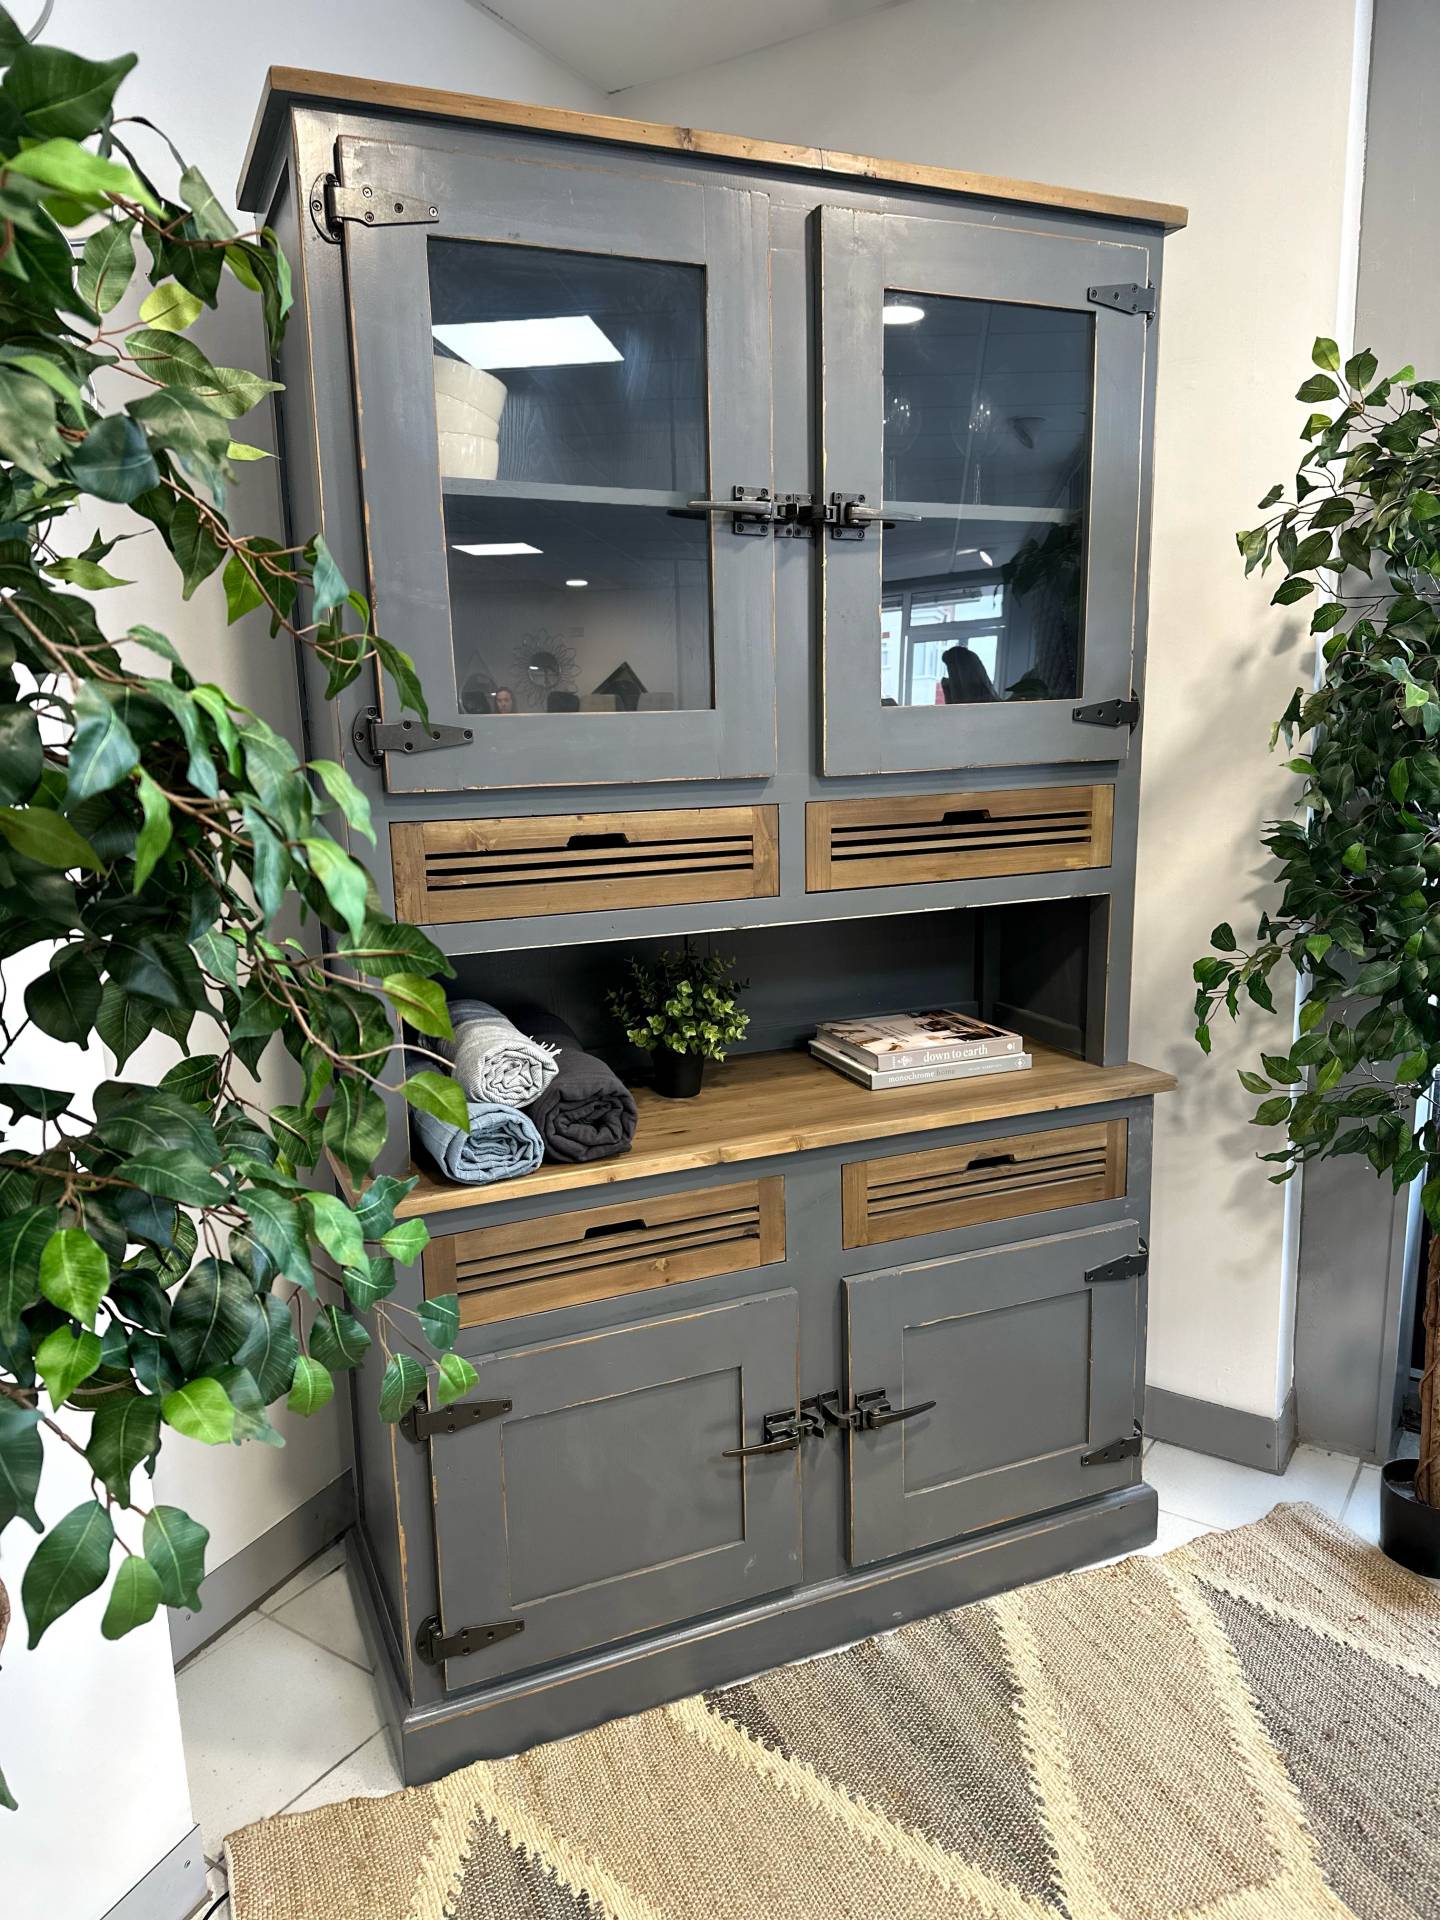 Kitchen Pantry available at Furniture Outlet Stores